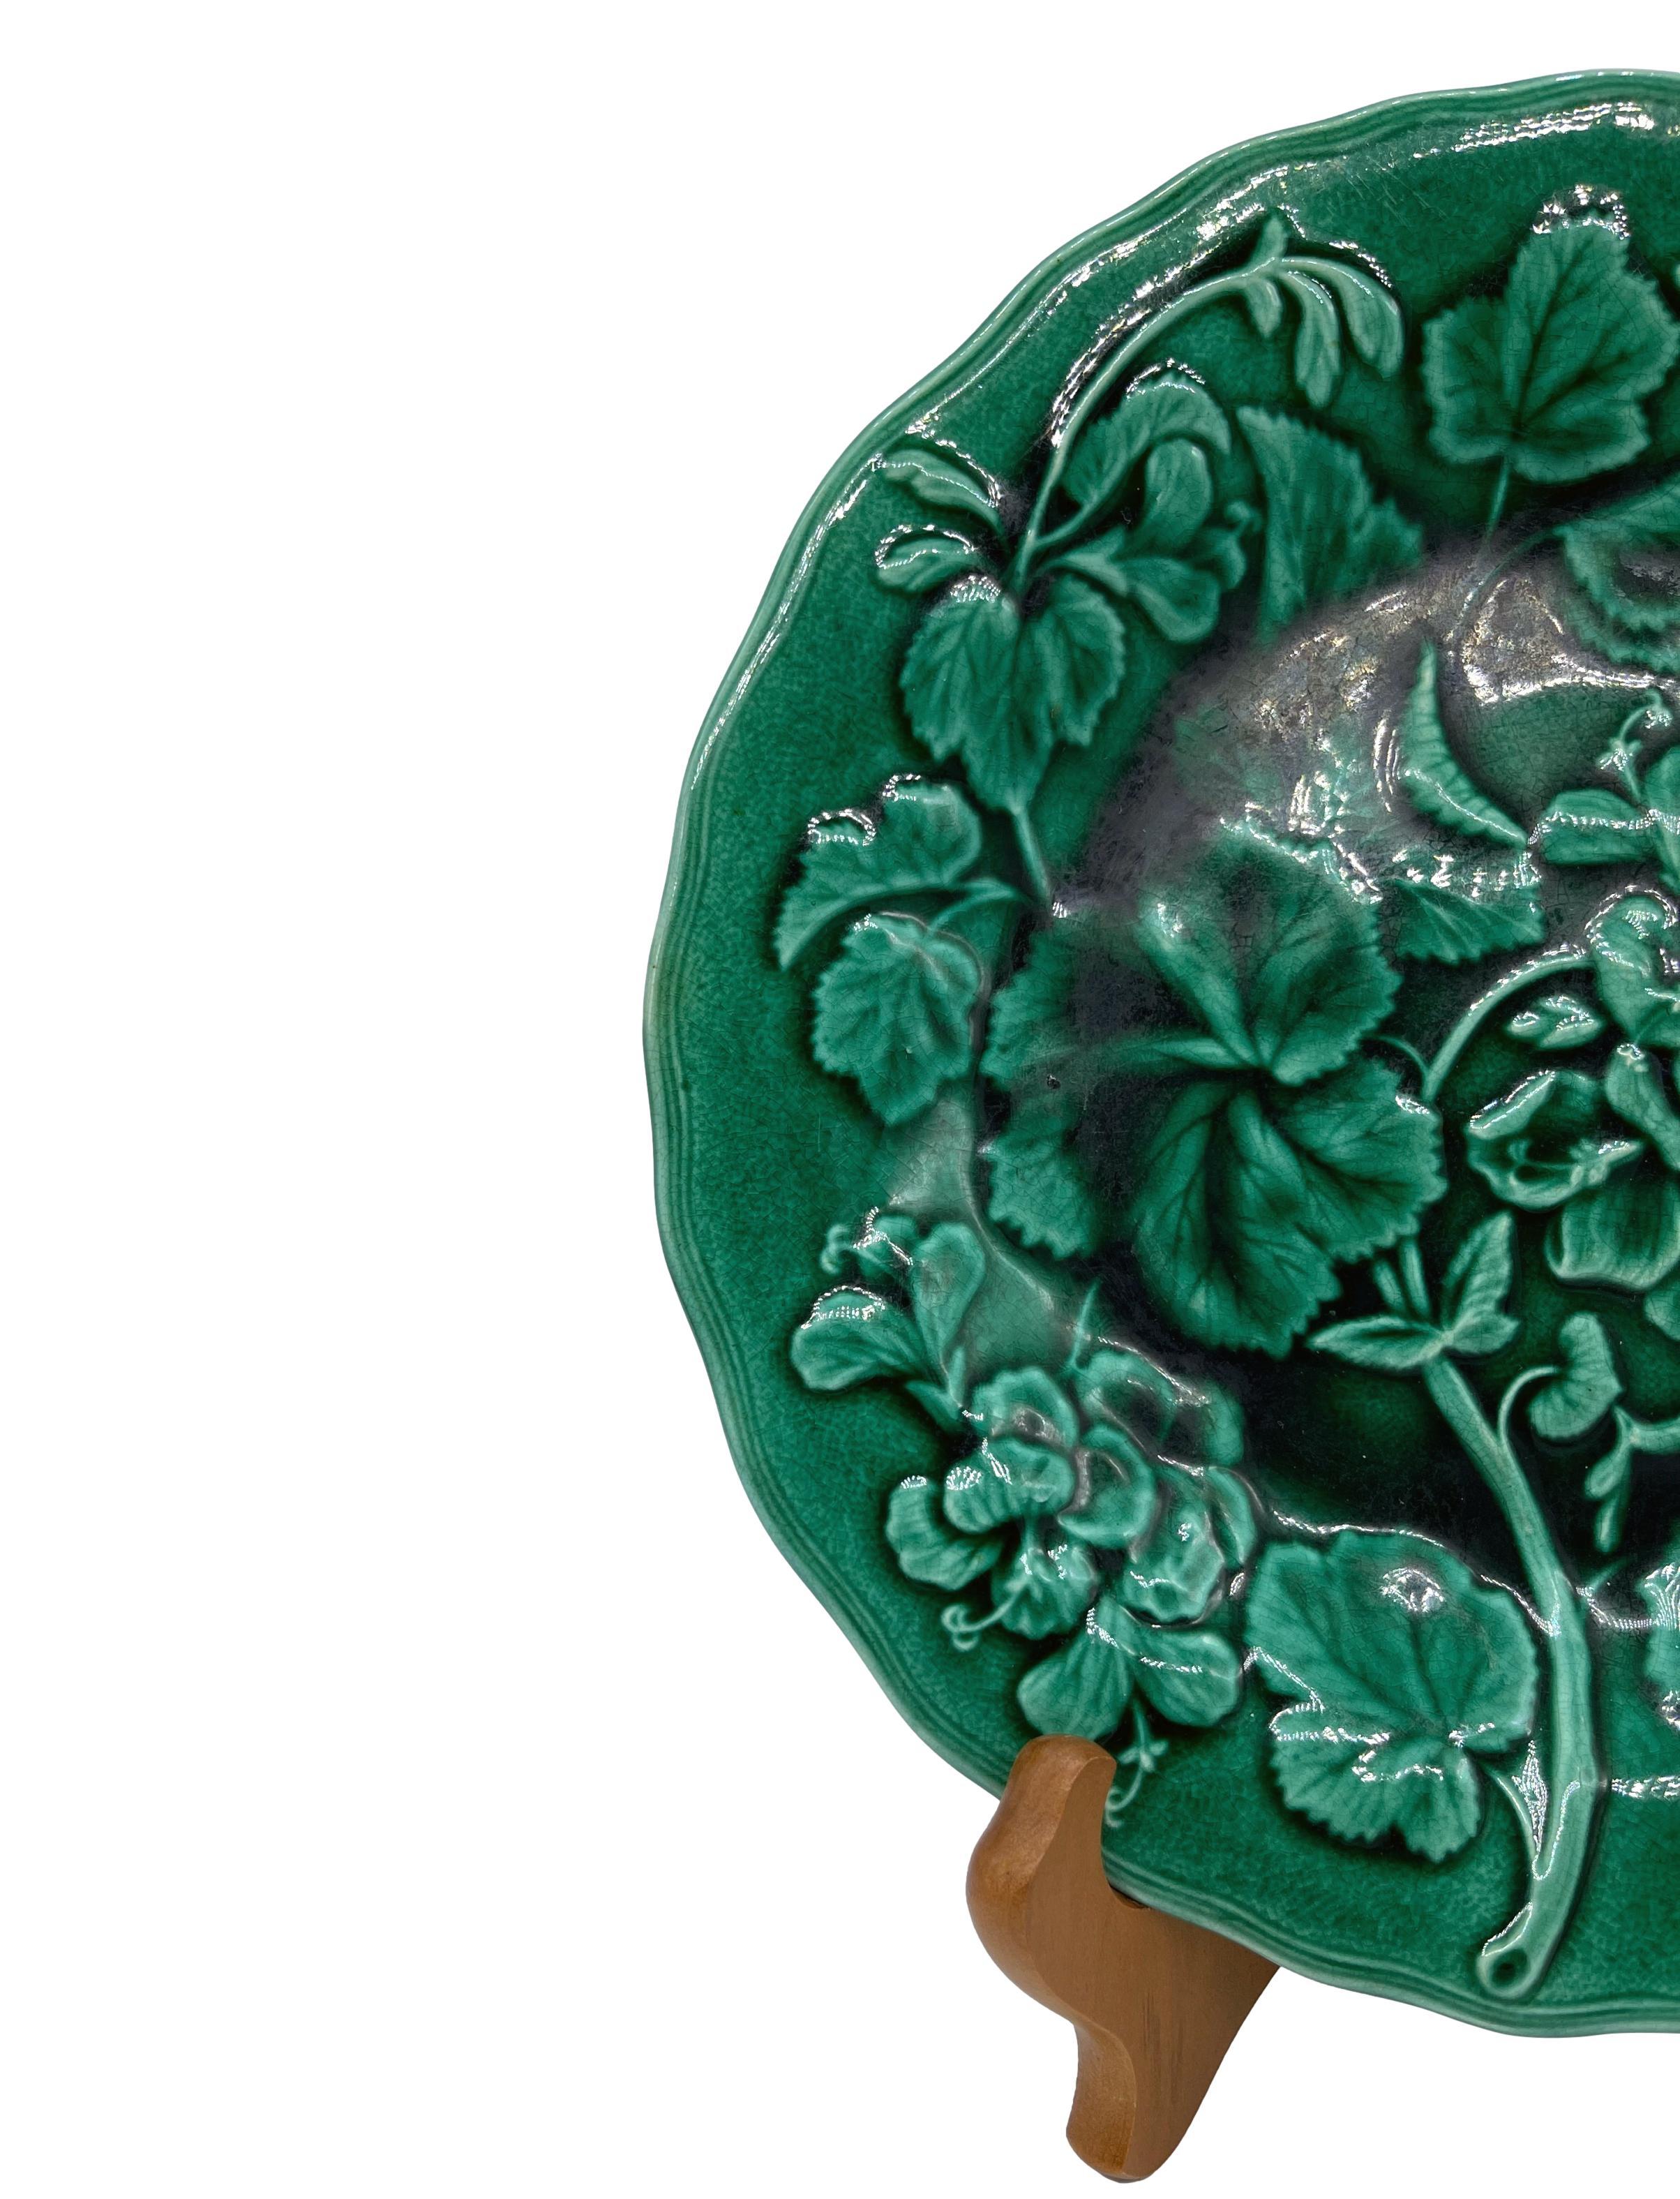 English majolica green-glazed 9-inch plate, with relief molded geranium plants and blossoms and shaped rim, the reverse with impressed mark 'HOPE & CARTER, ENGLAND,' ca. 1880.
For thirty years we have been among the preeminent specialists in fine